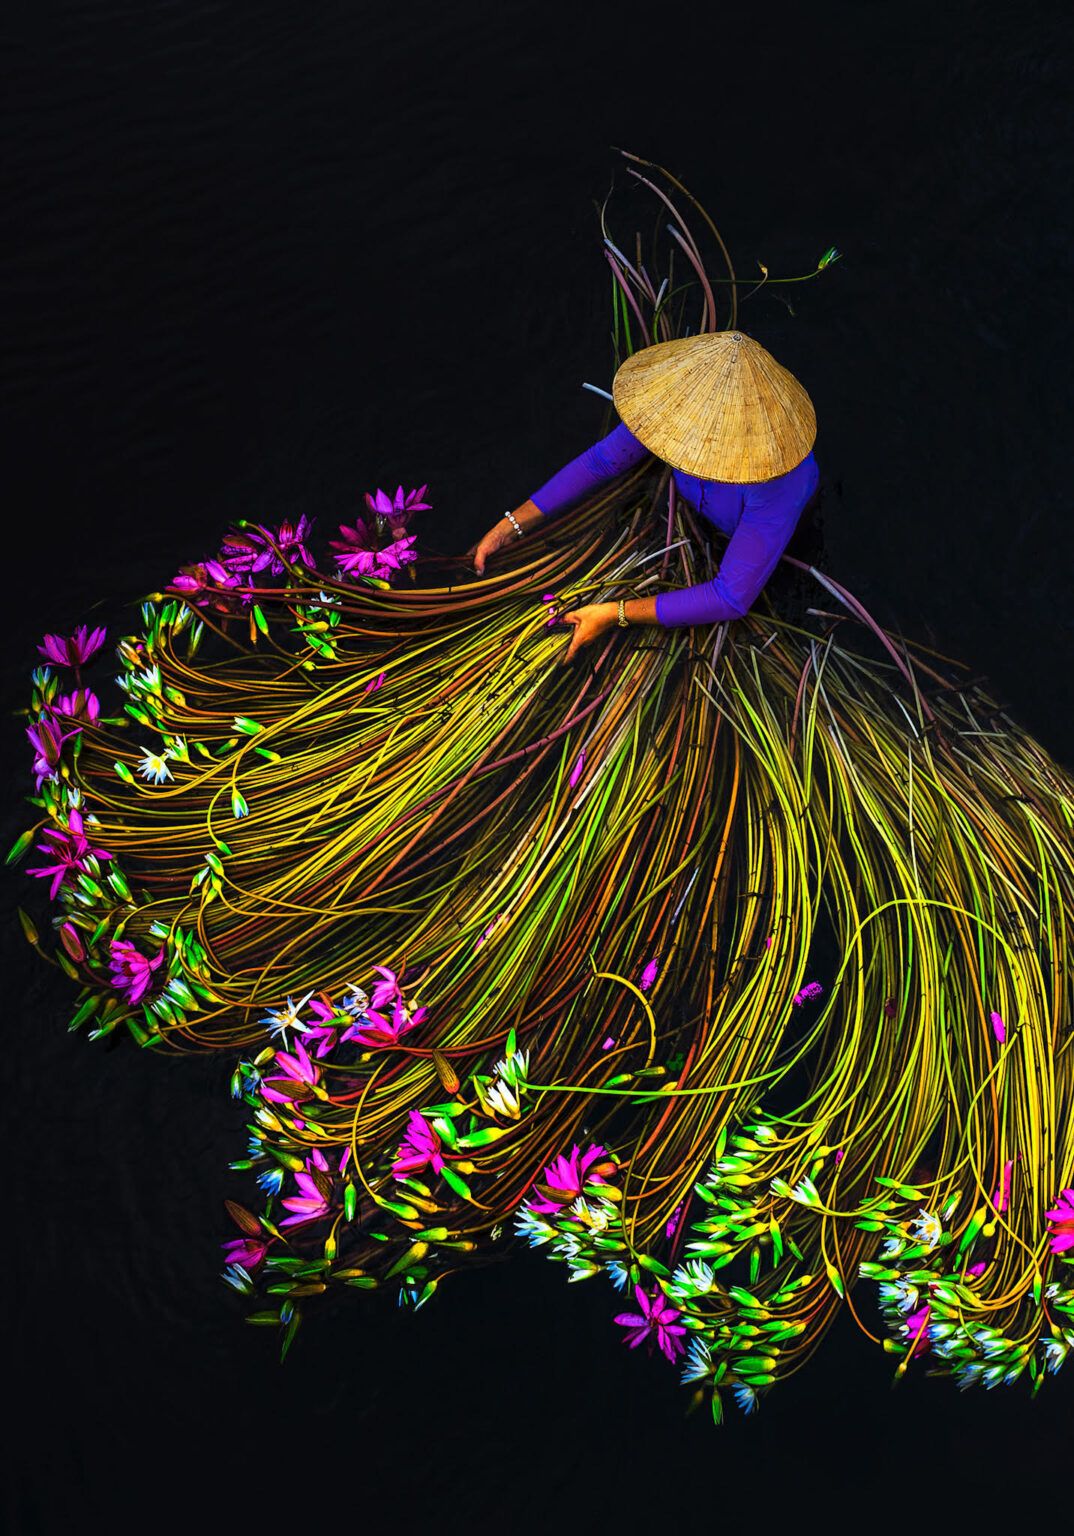 Vivid Photographs by Trung Huy Pham Capture Annual Water Lily Harvest in Vietnam